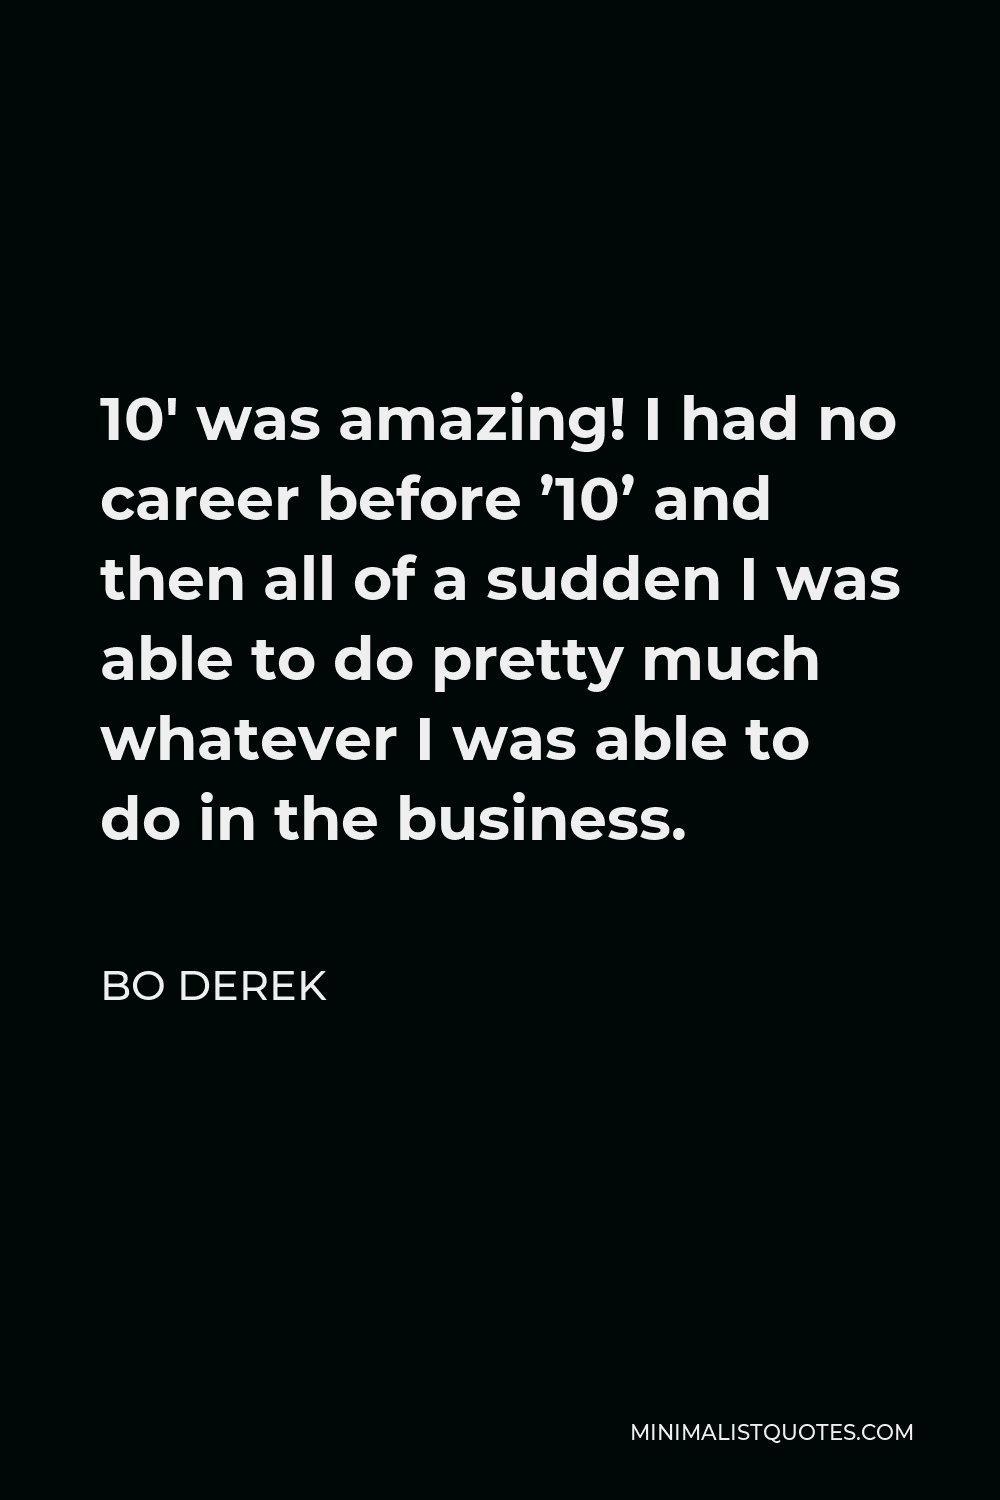 Bo Derek Quote - 10′ was amazing! I had no career before ’10’ and then all of a sudden I was able to do pretty much whatever I was able to do in the business.